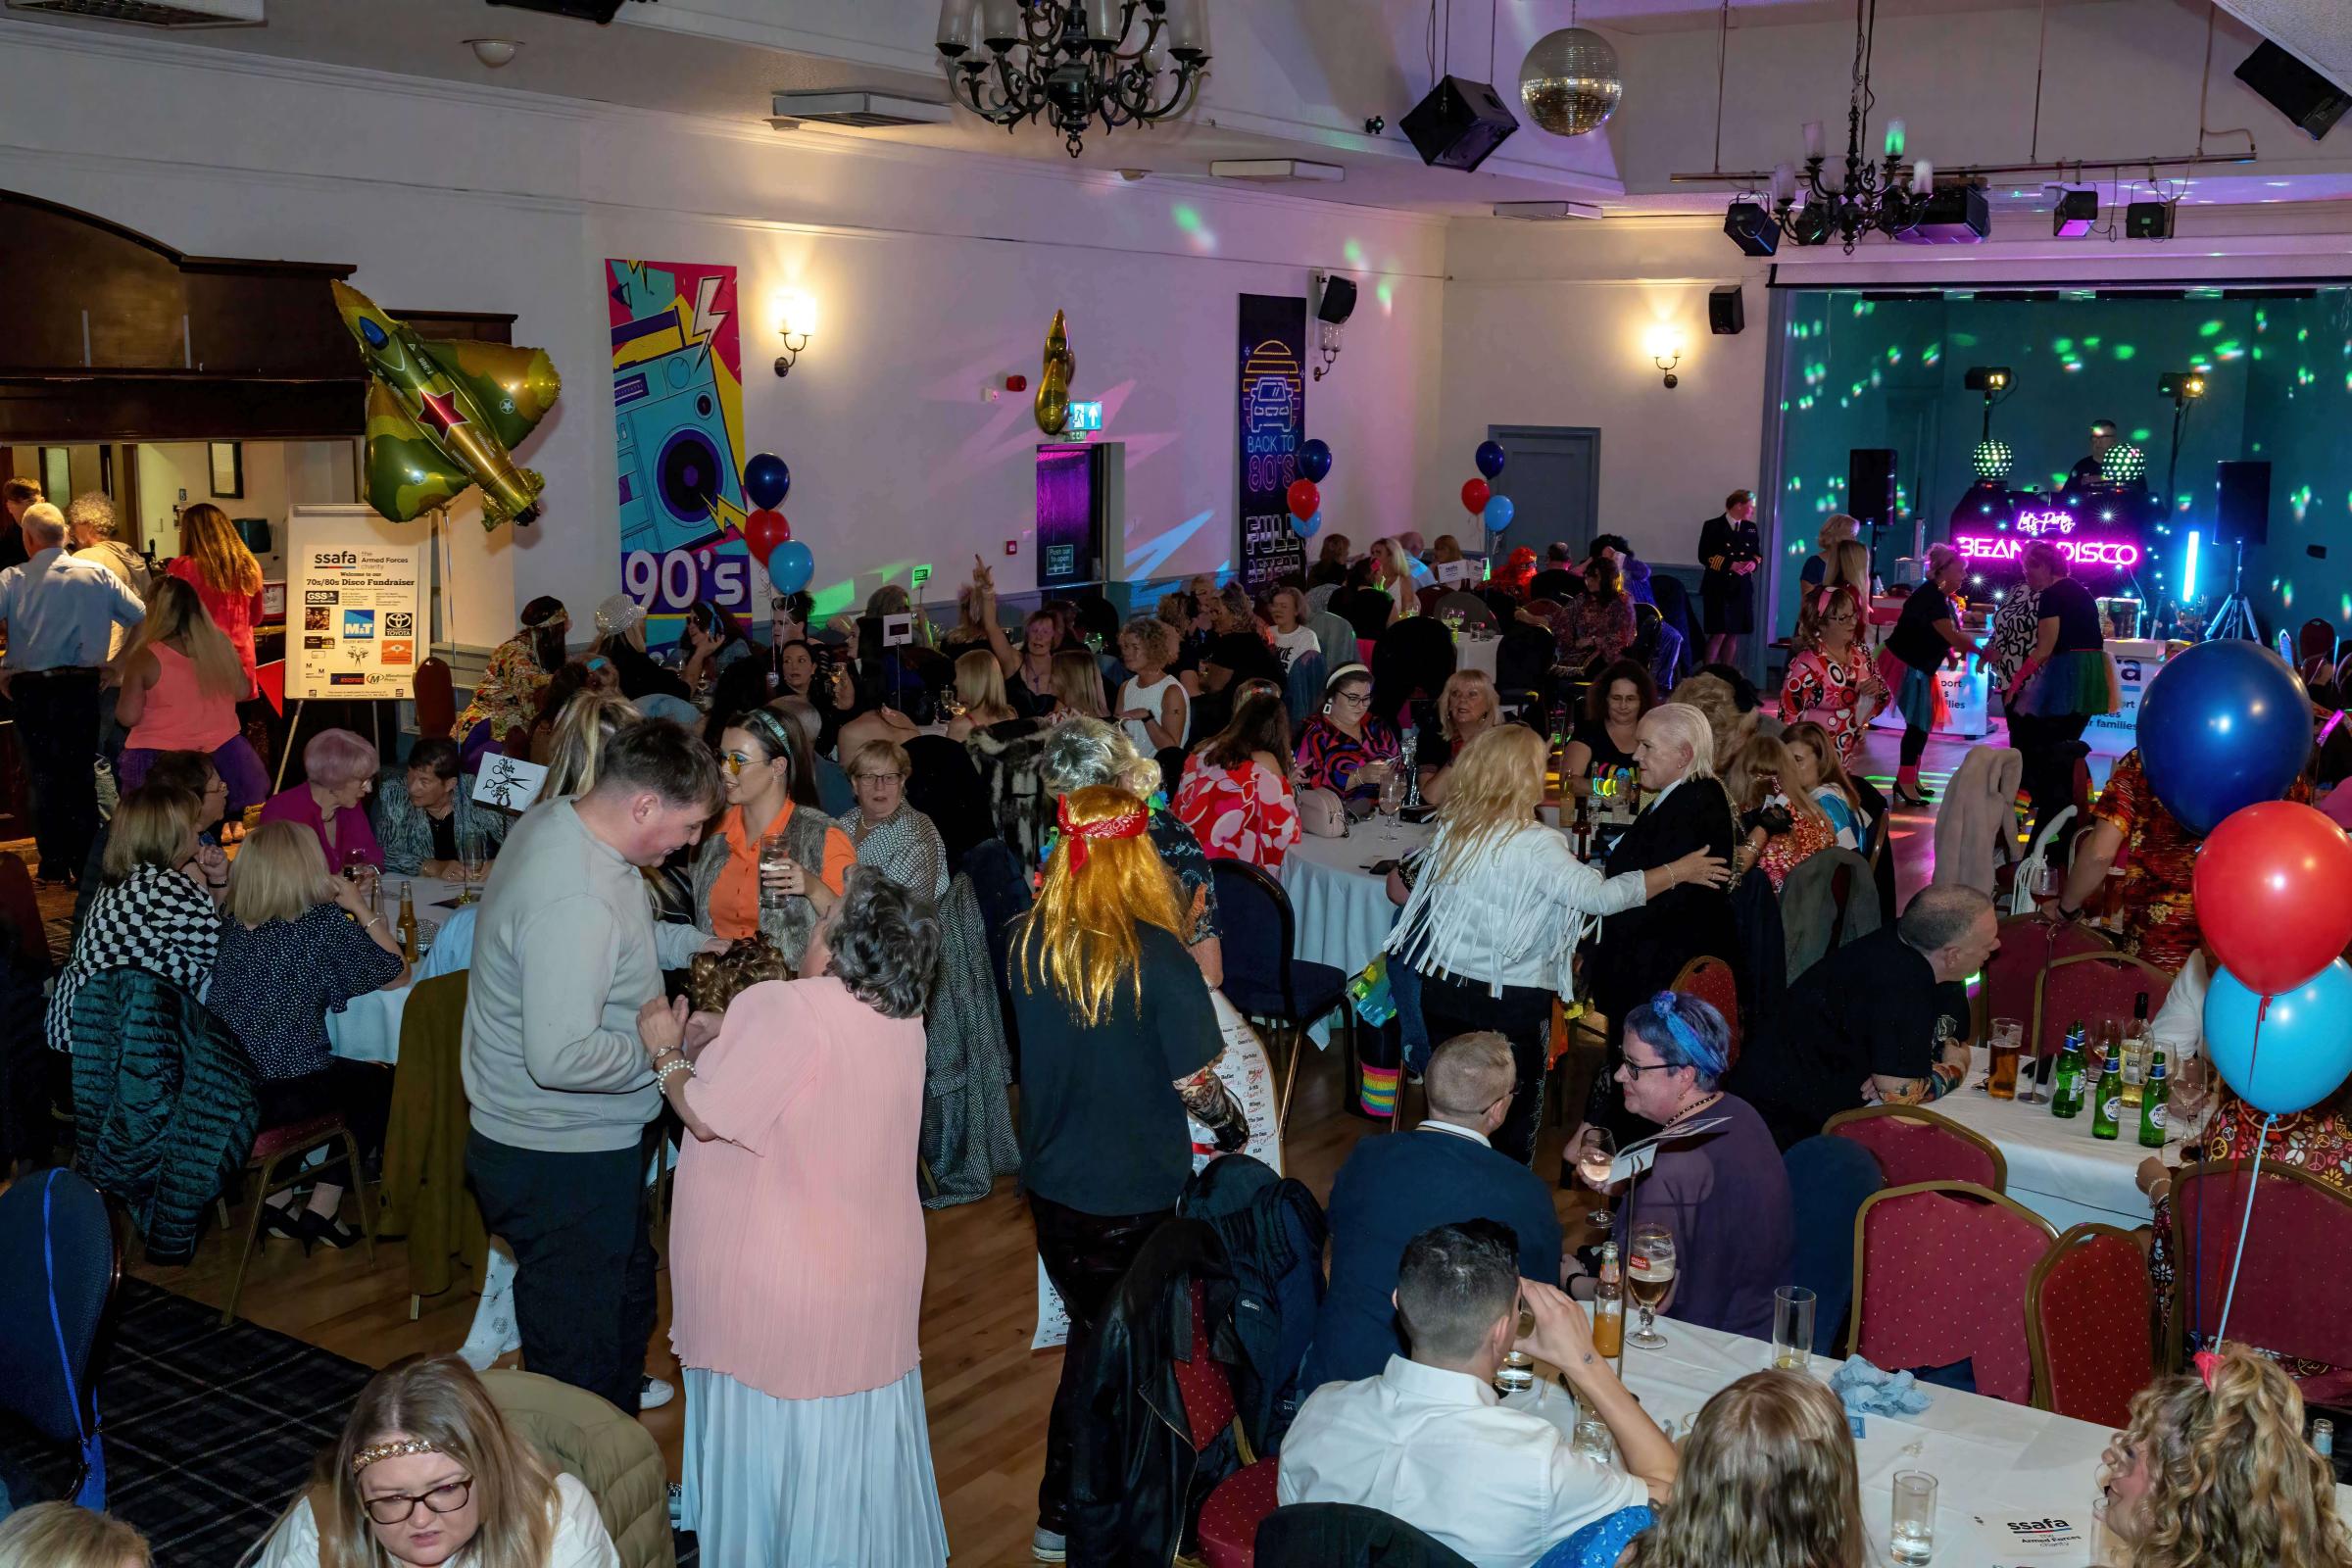 SSAFA held a charity 70s/80s disco at the weekend